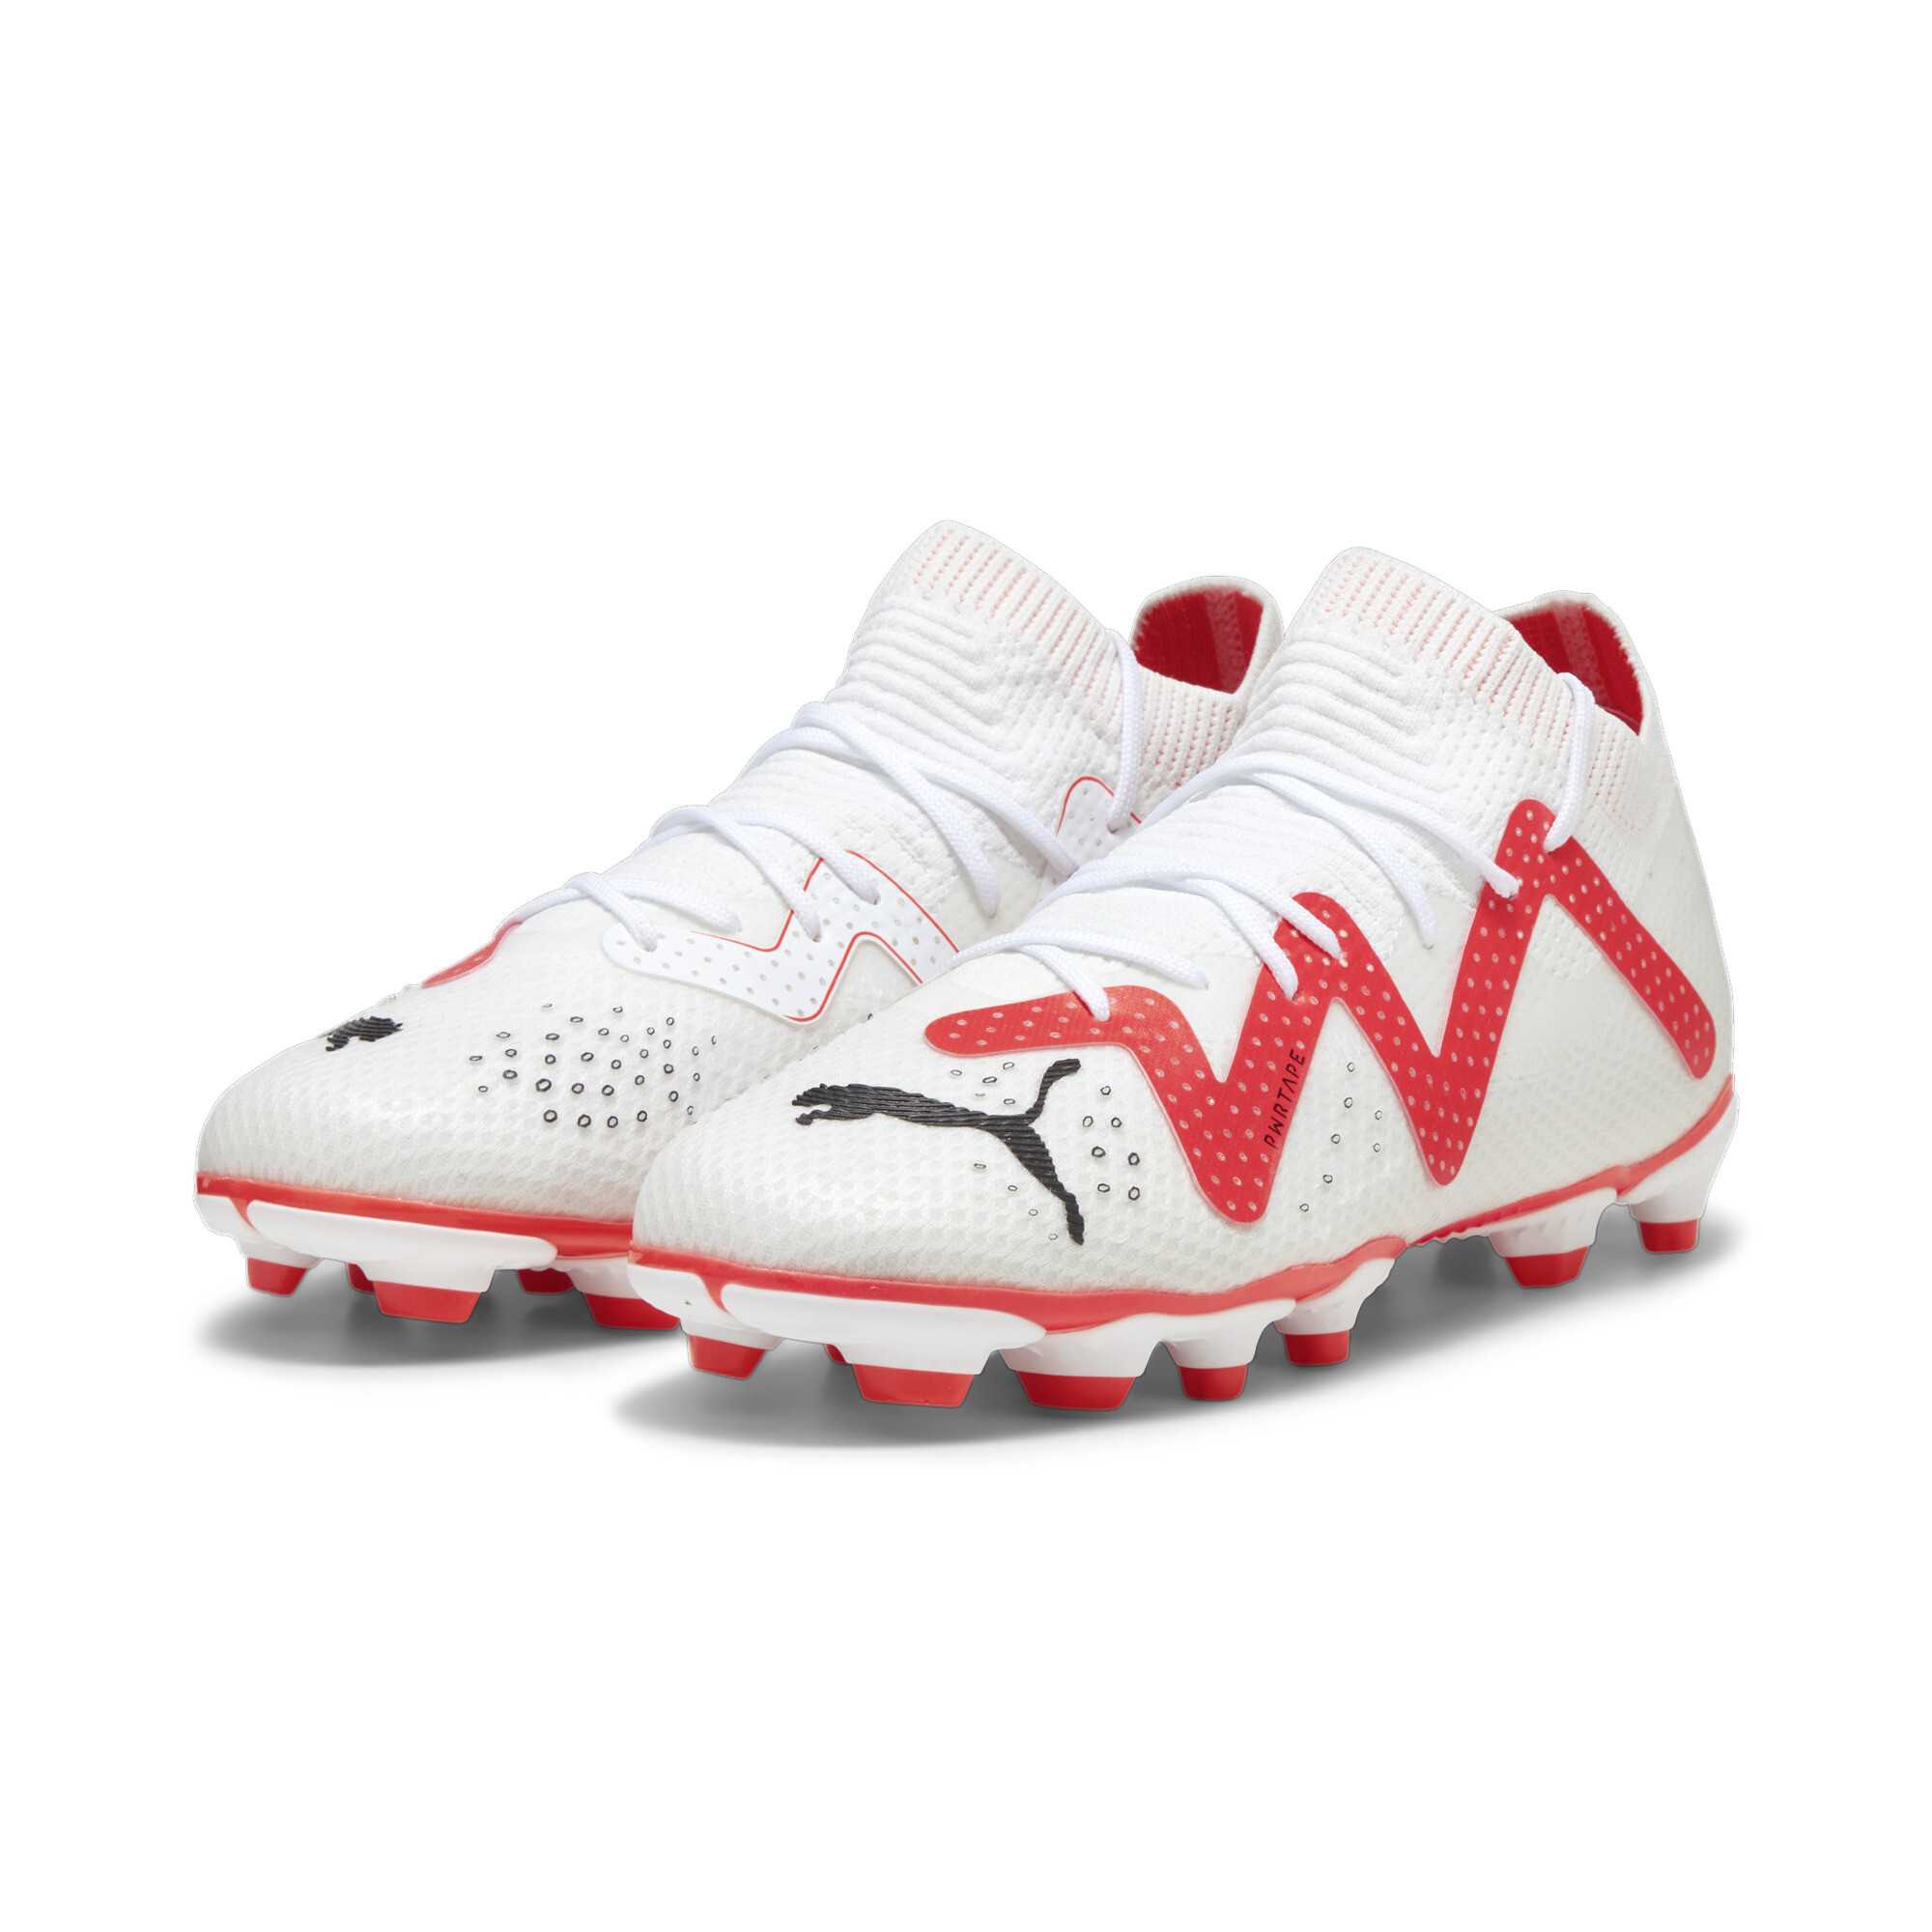 Puma FUTURE PRO FG/AG Youth Football Boots, White, Size 31, Shoes